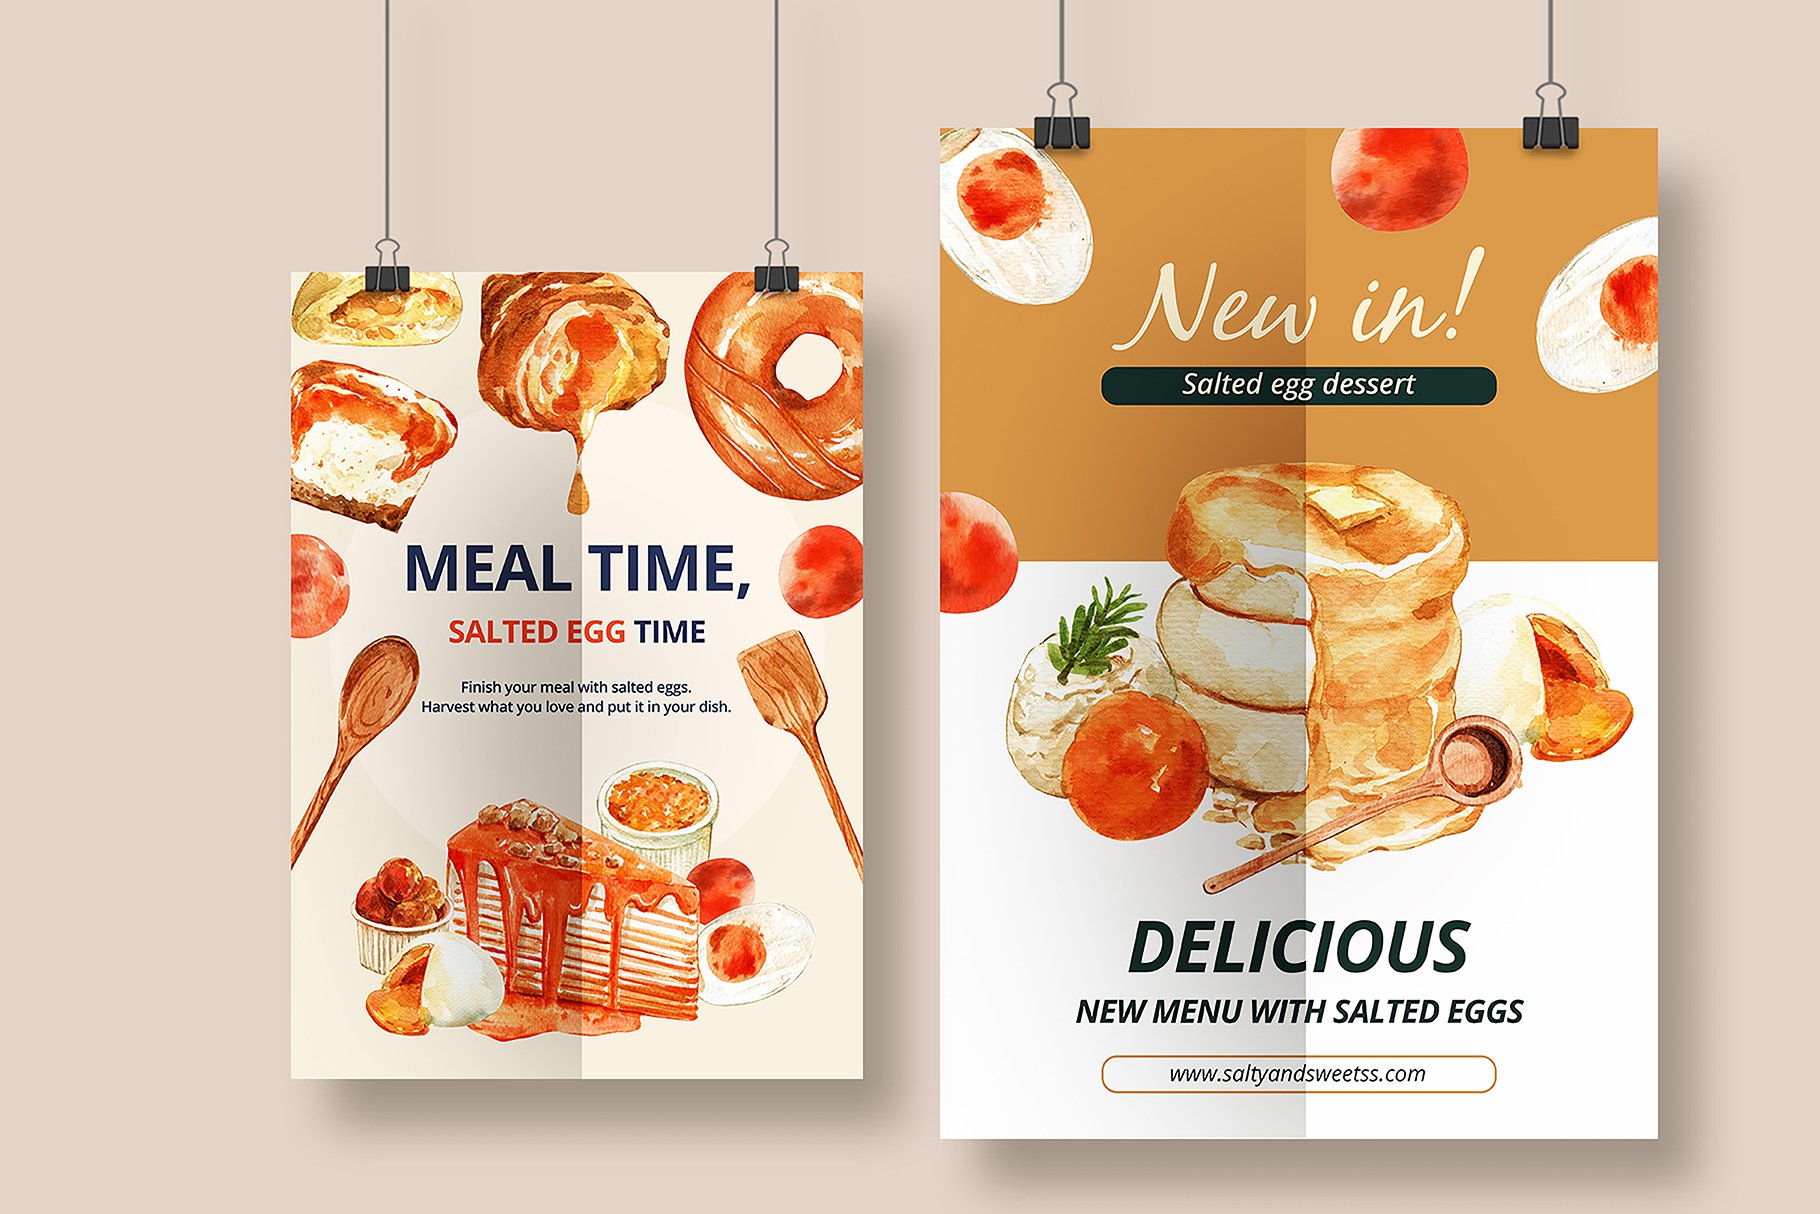 Stylish salted egg mockup posters for your caffe.